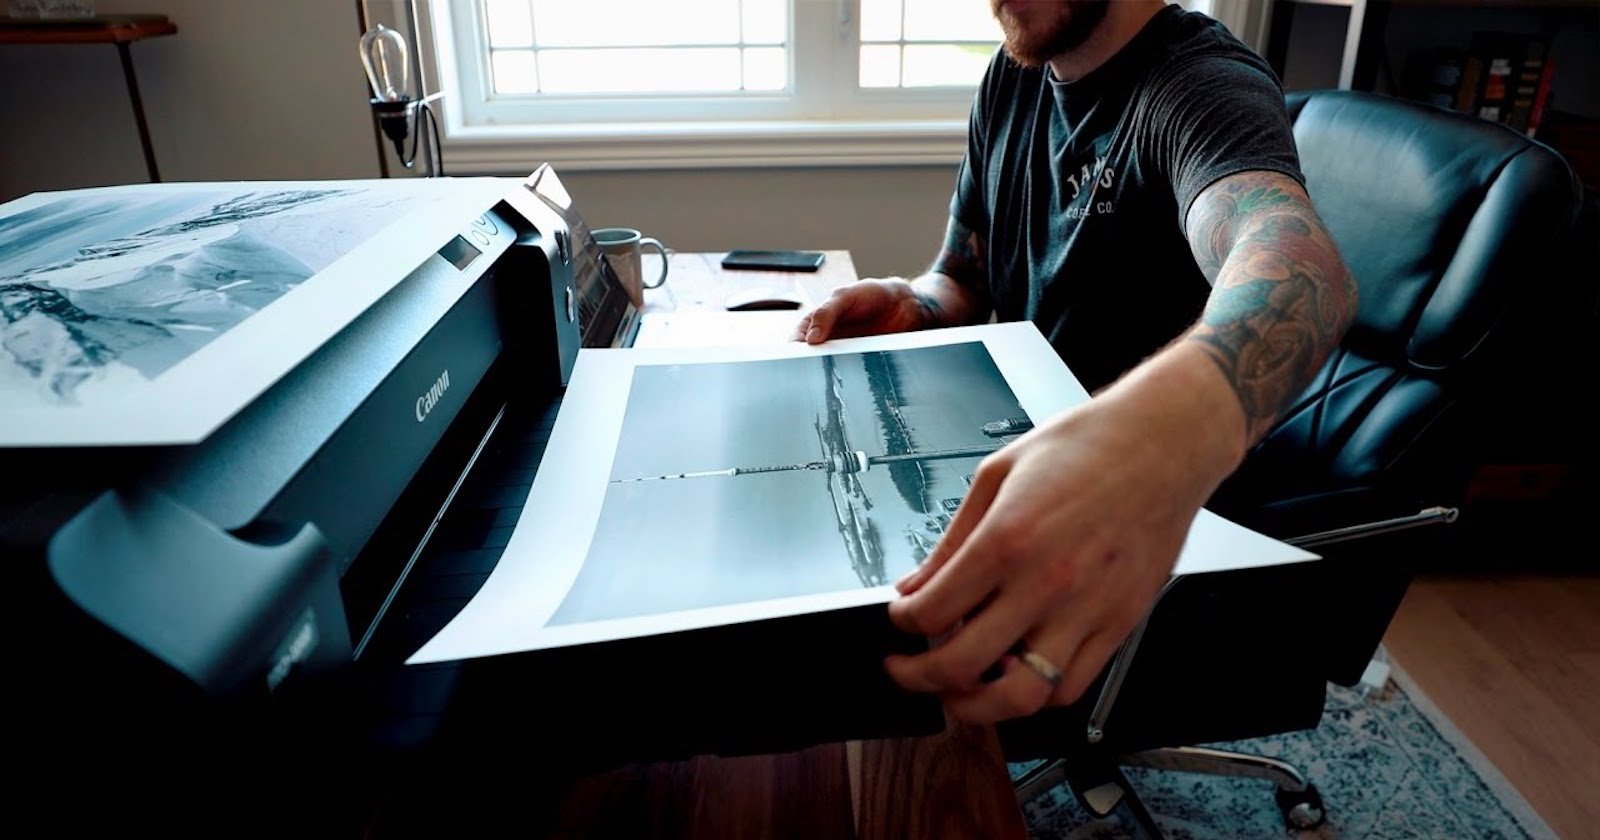 Why Printing Your Photos Will Make You a Better Photographer